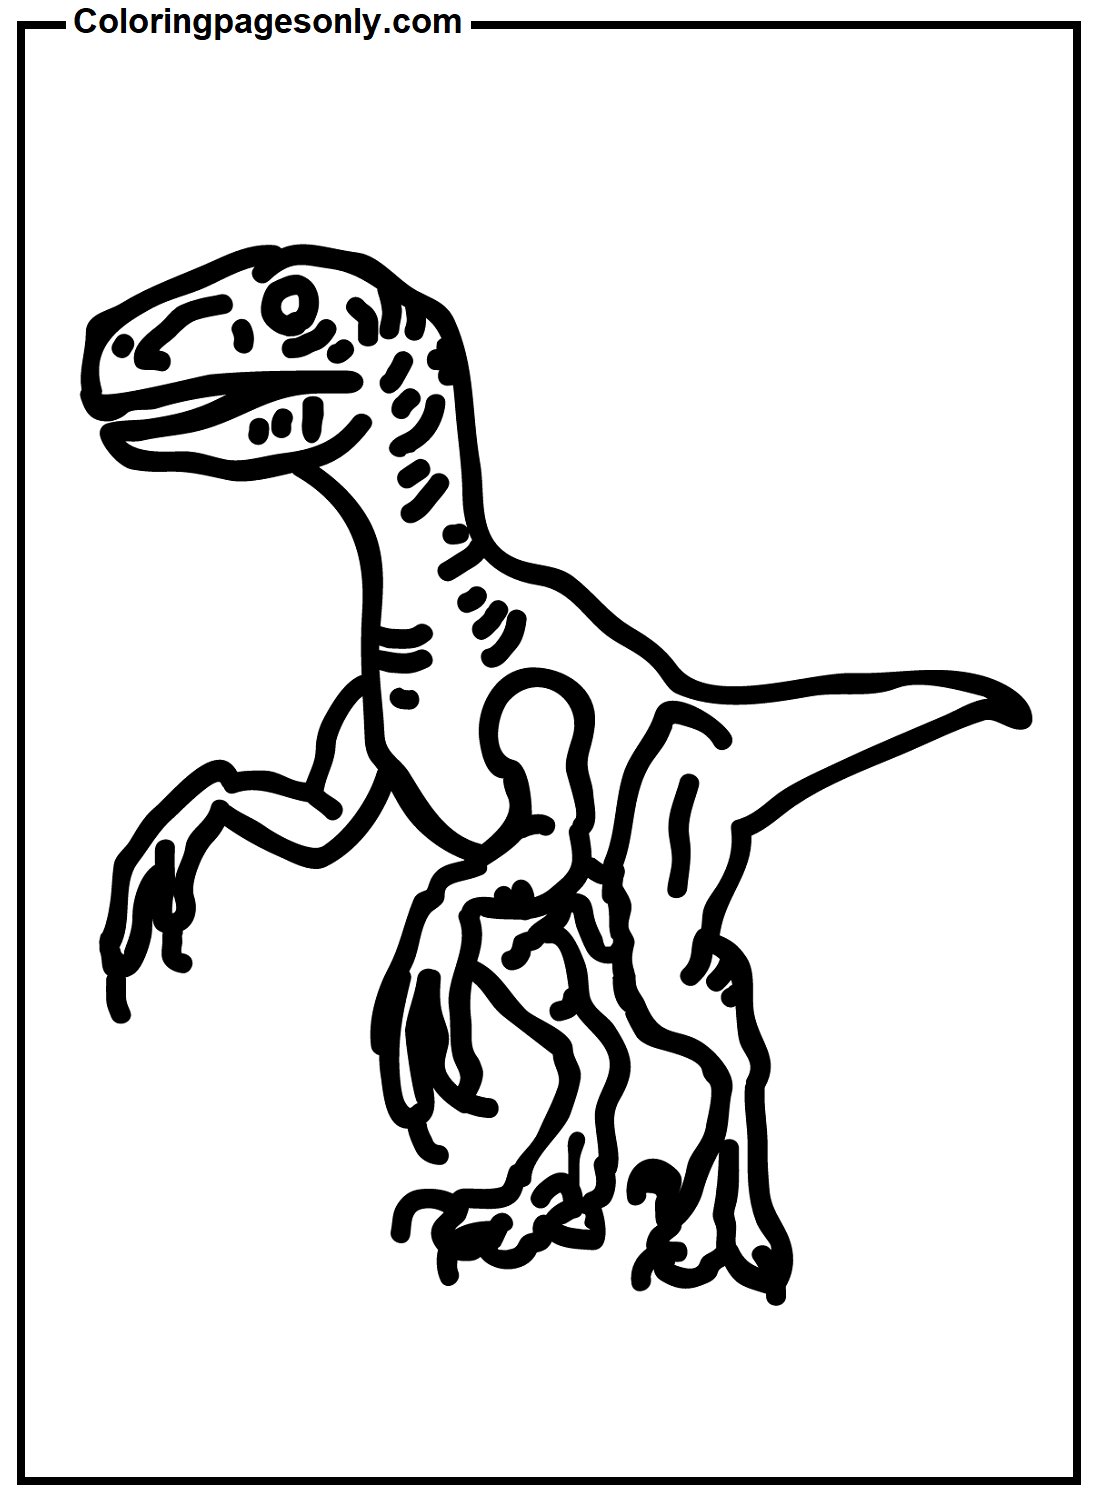 Dinosaur Velociraptor Picture Coloring Pages